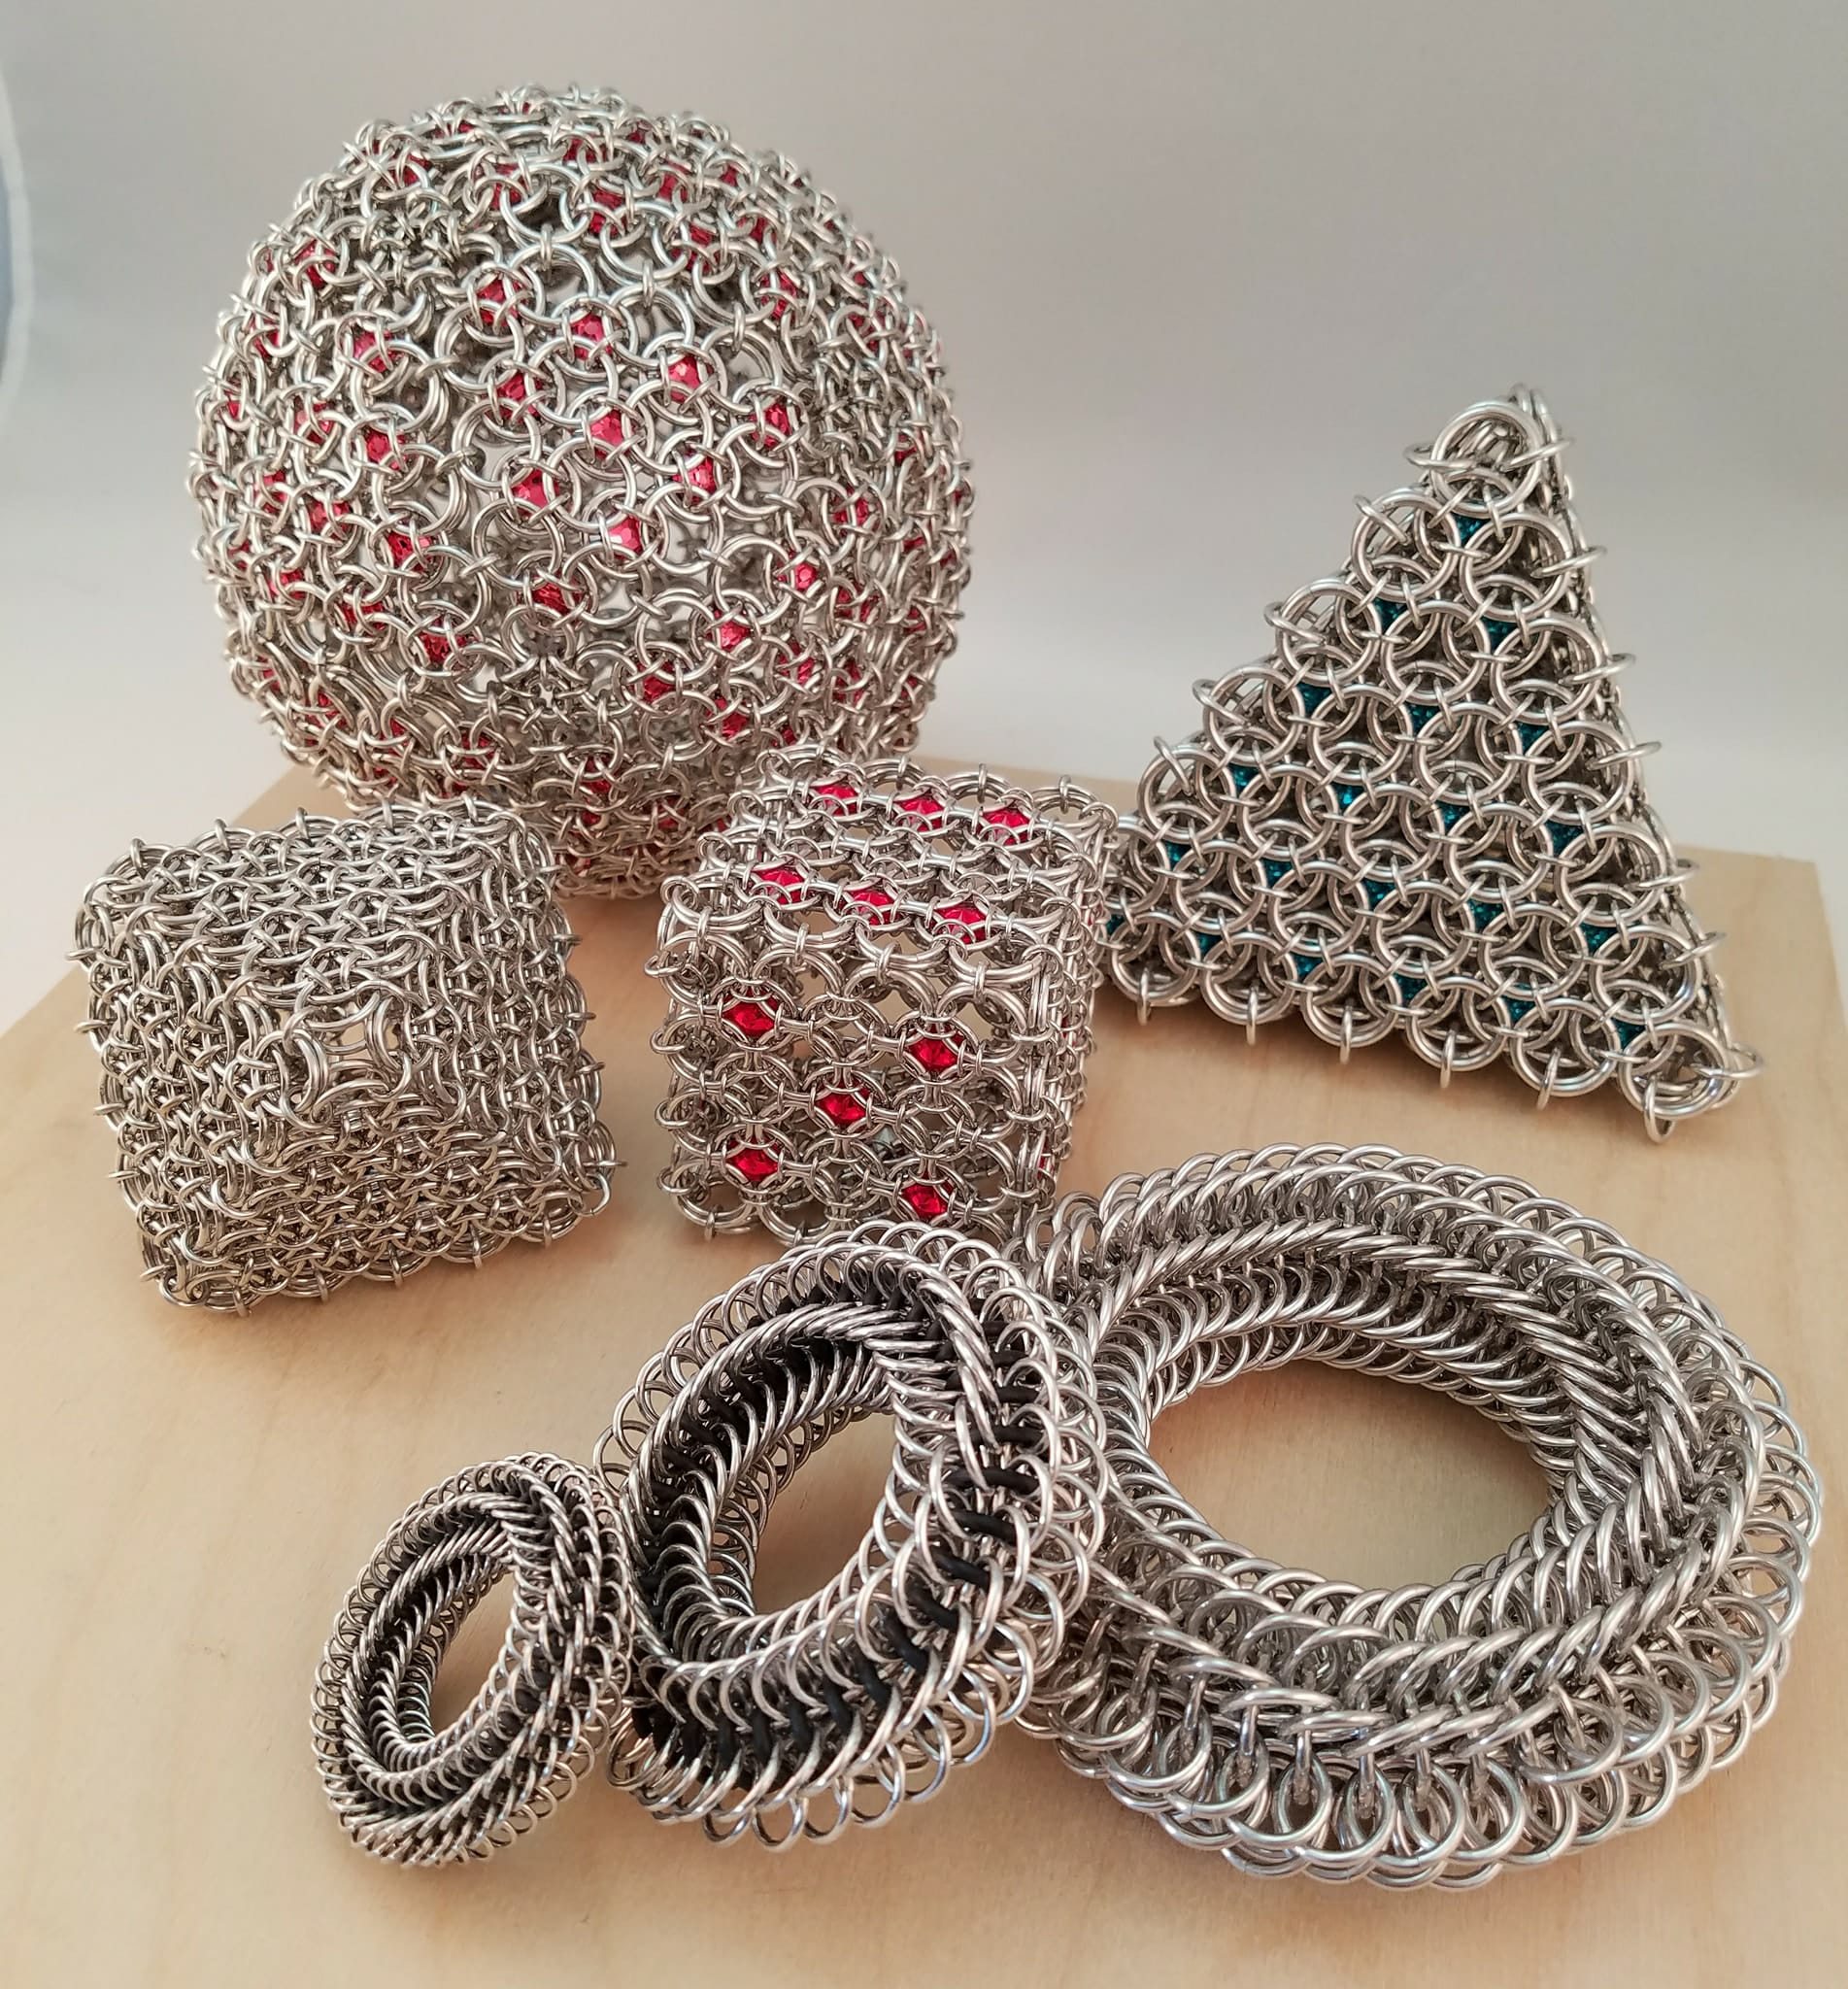 3D chainmaille shapes